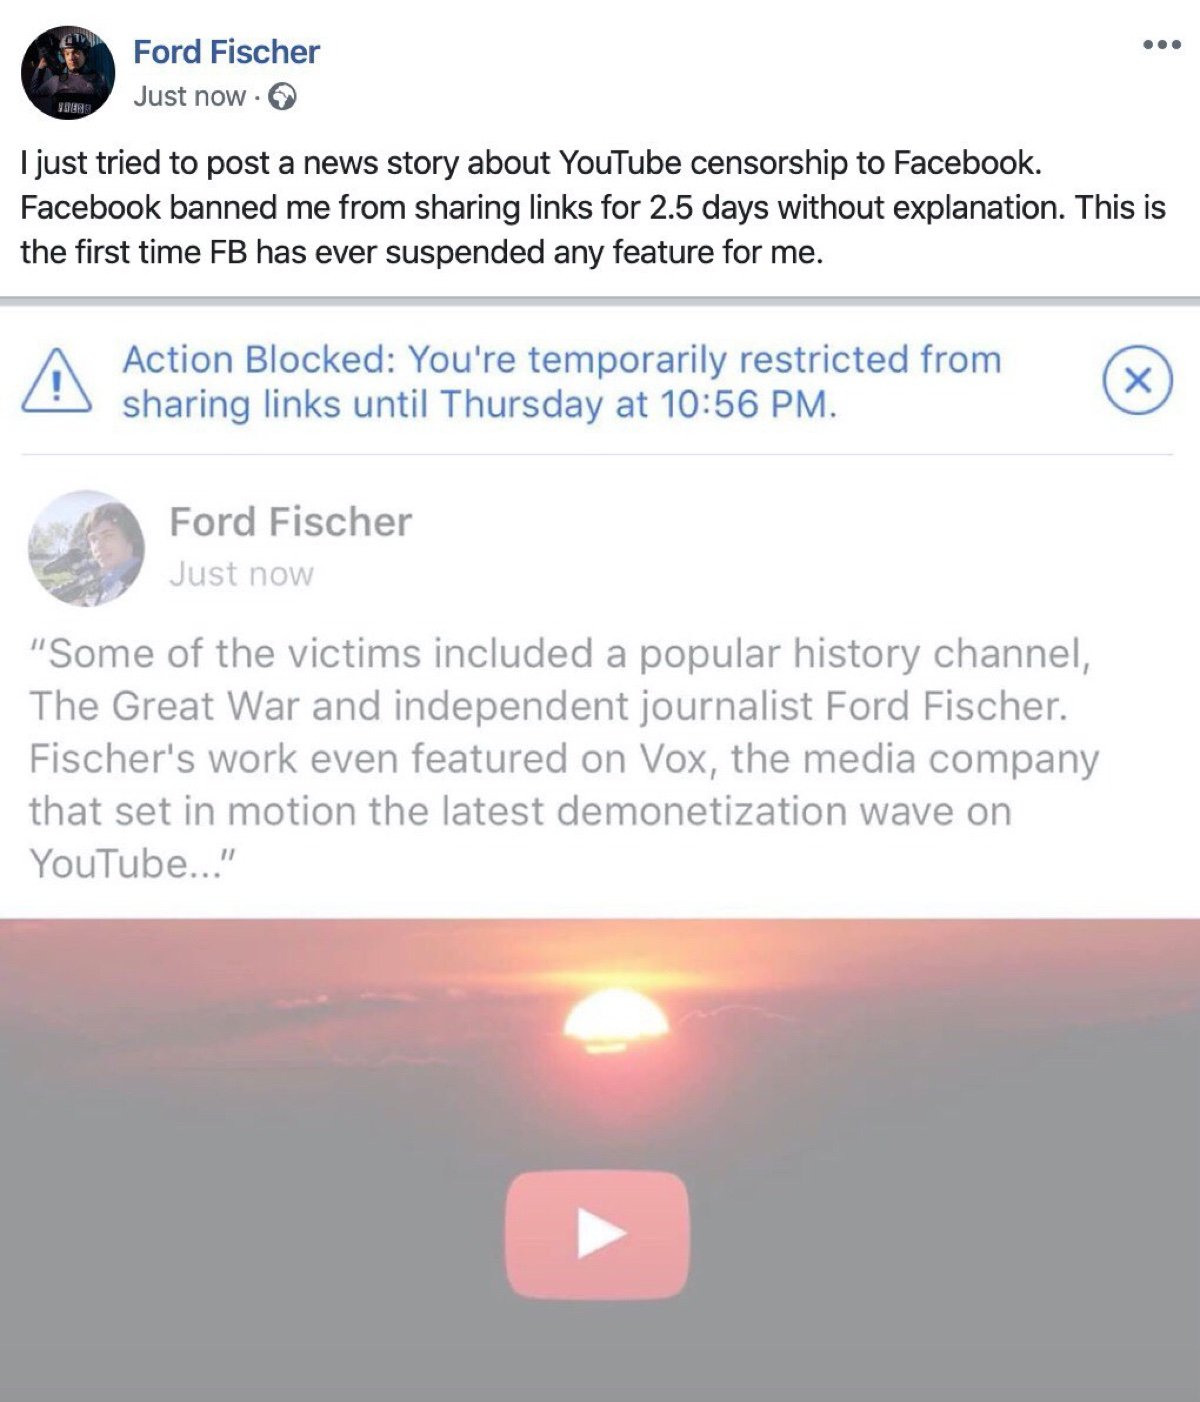 Ford Fischer writing that this is the first time he’s ever had any of his Facebook features suspended (Facebook - Ford Fischer)